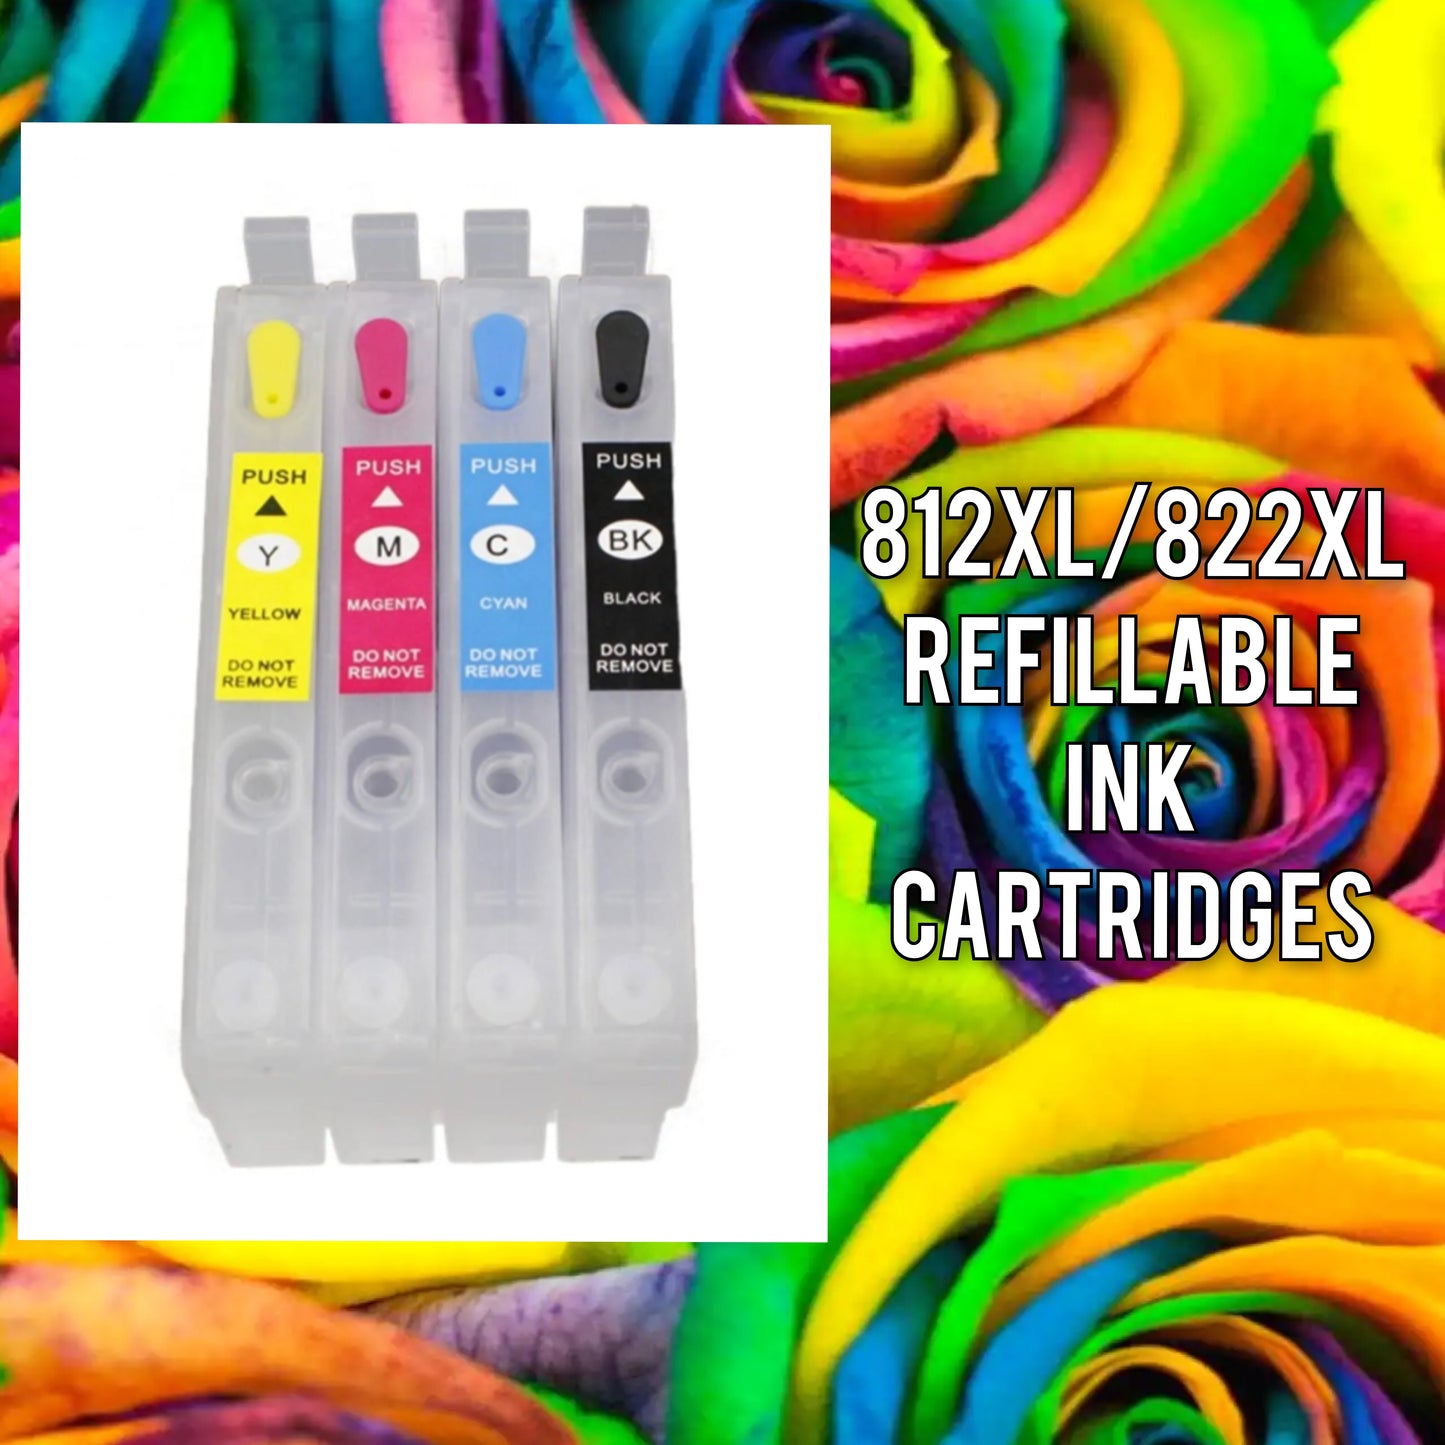 812xl 822xl Refillable Ink Cartridge With Chip For Epson WF-7820 WF-7840 C7000 WF-3820 4830, 4834, 4820, 4833, 3820, 4820